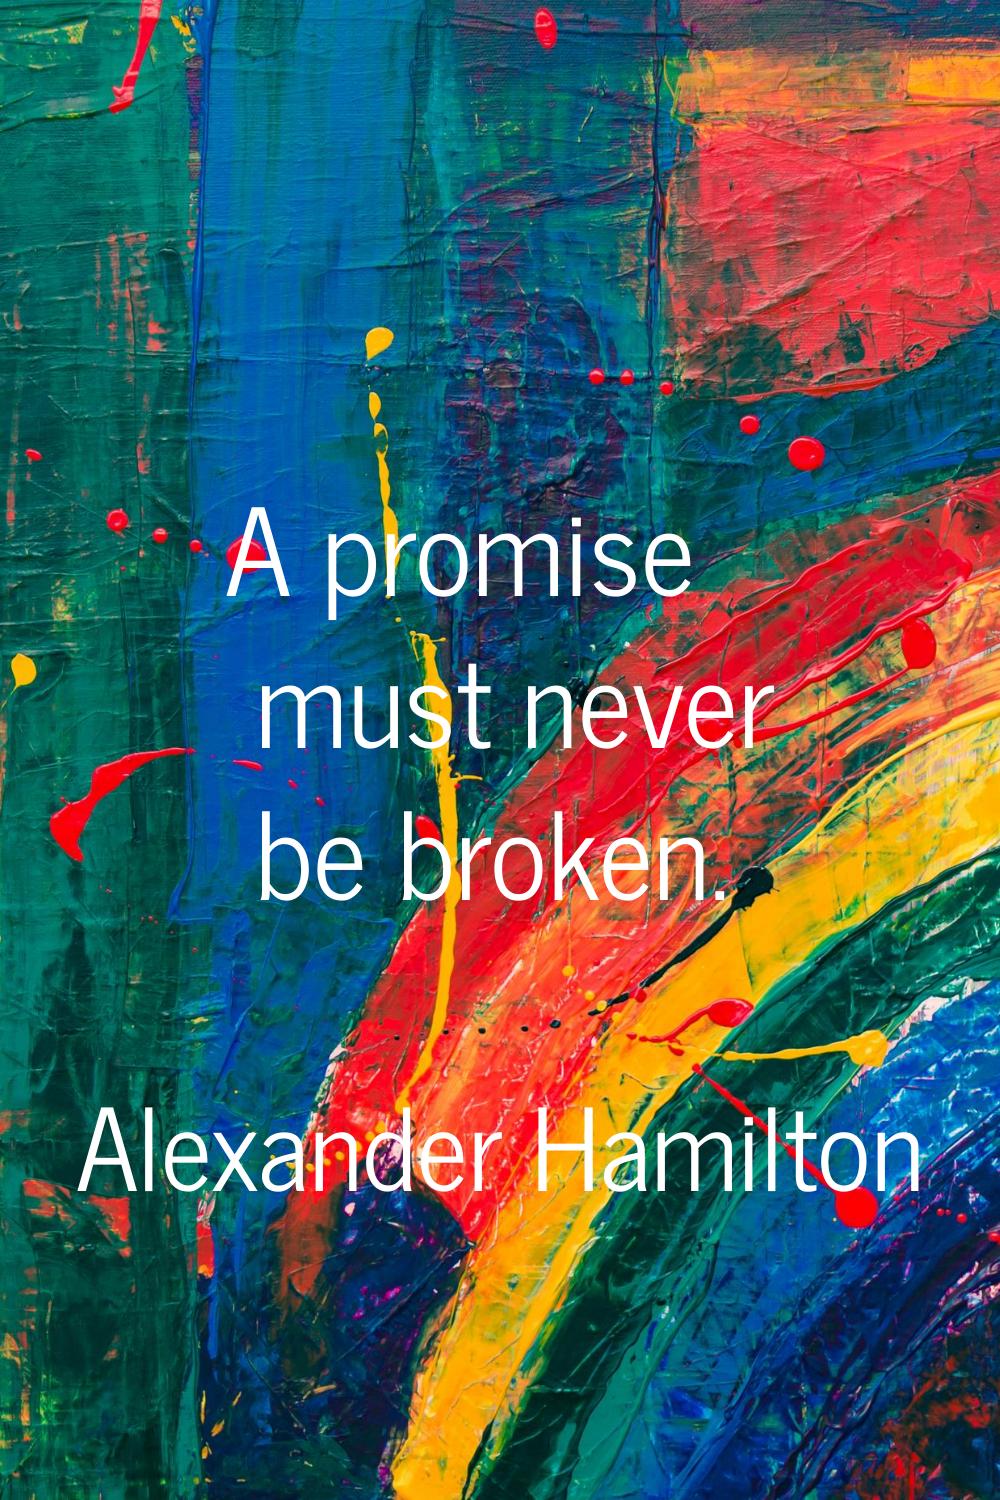 A promise must never be broken.